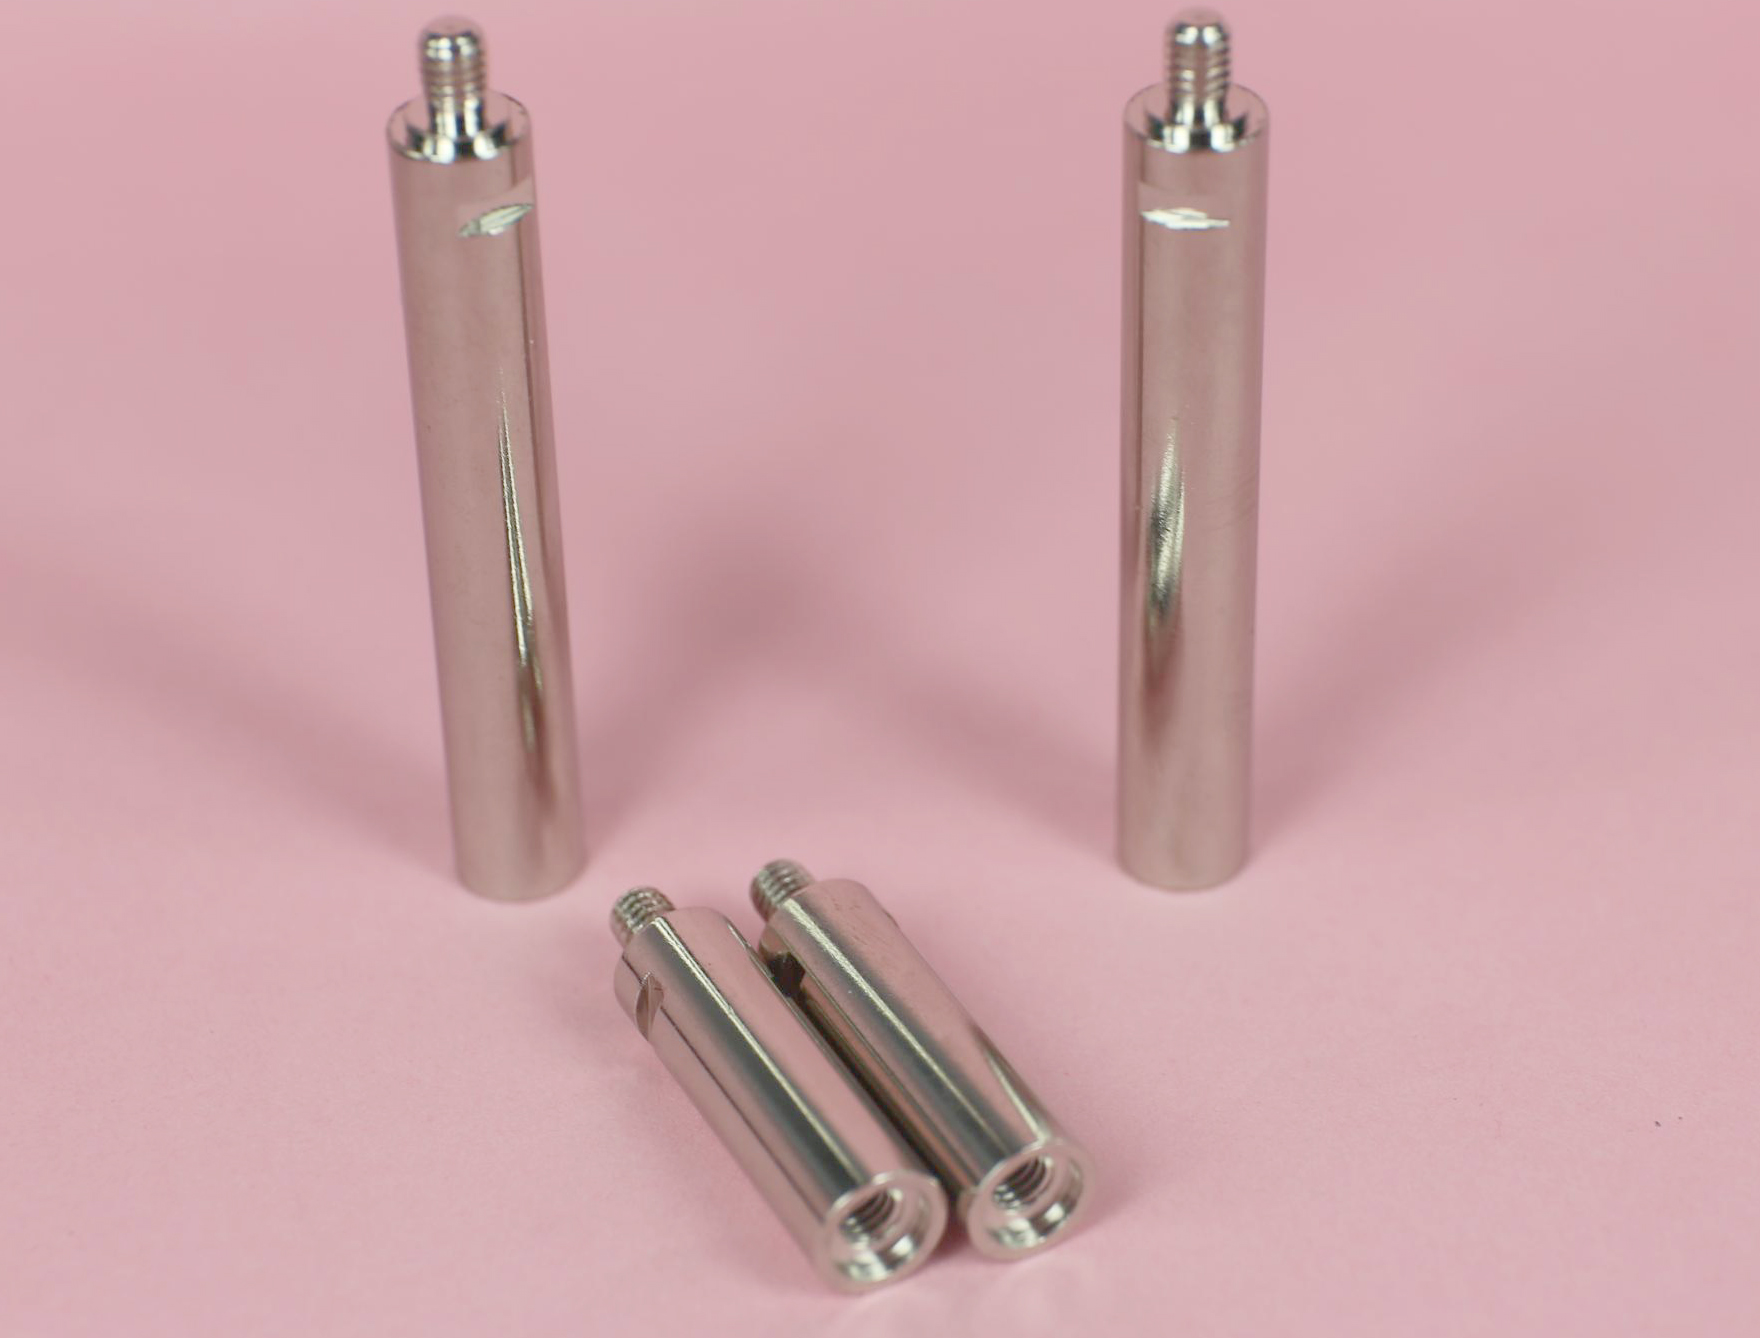 the set of metal rods for the pro-extender penis extender